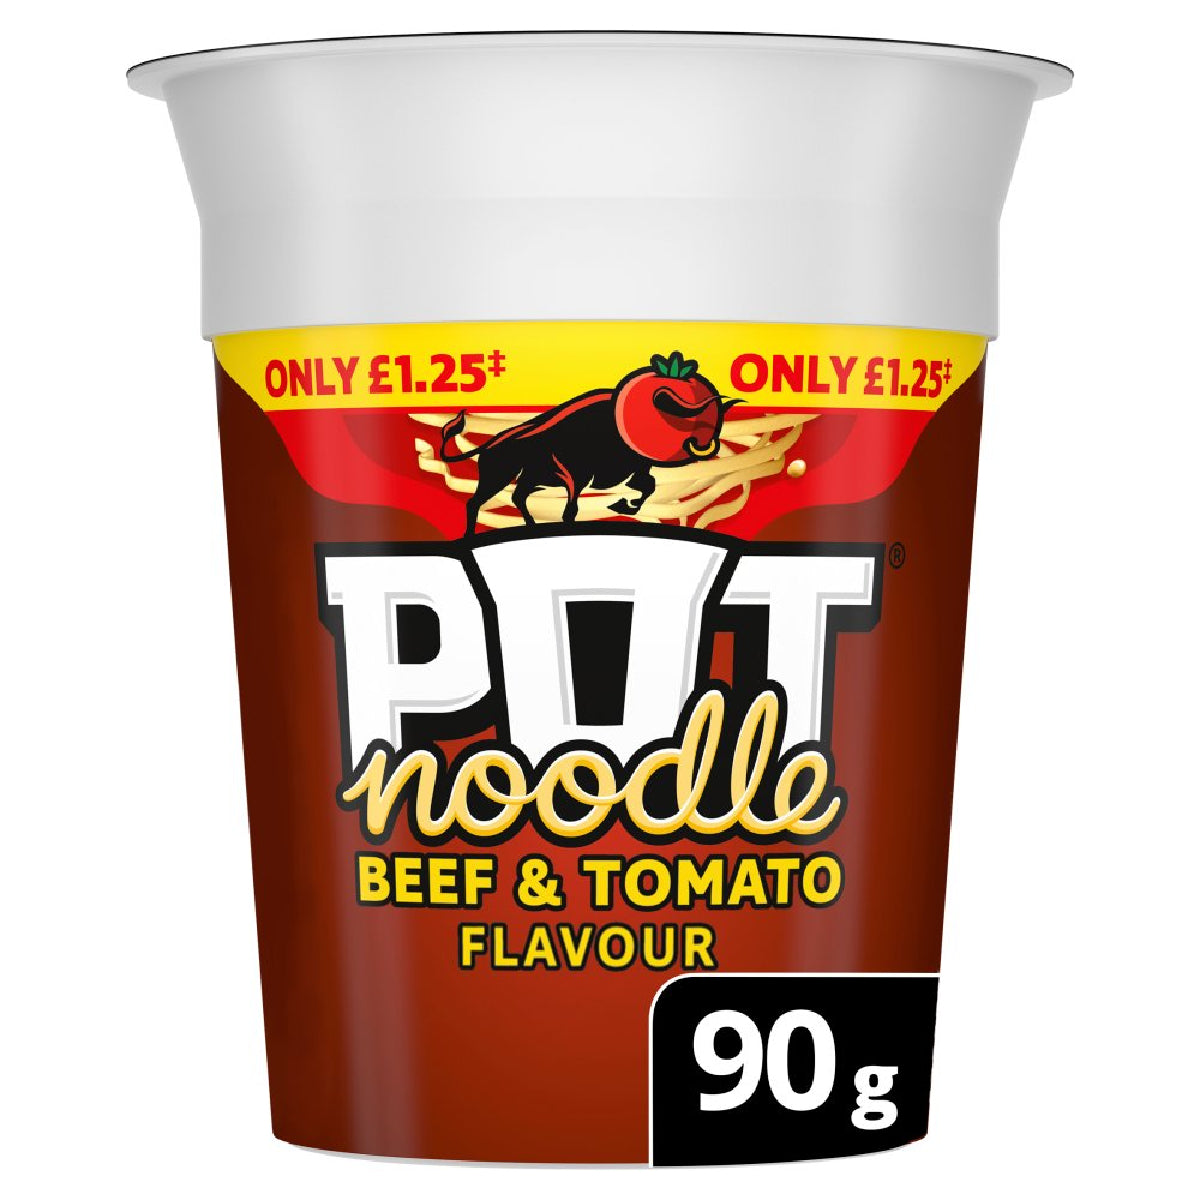 Pot Noodle - Beef & Tomato Flavour - 90g - Continental Food Store